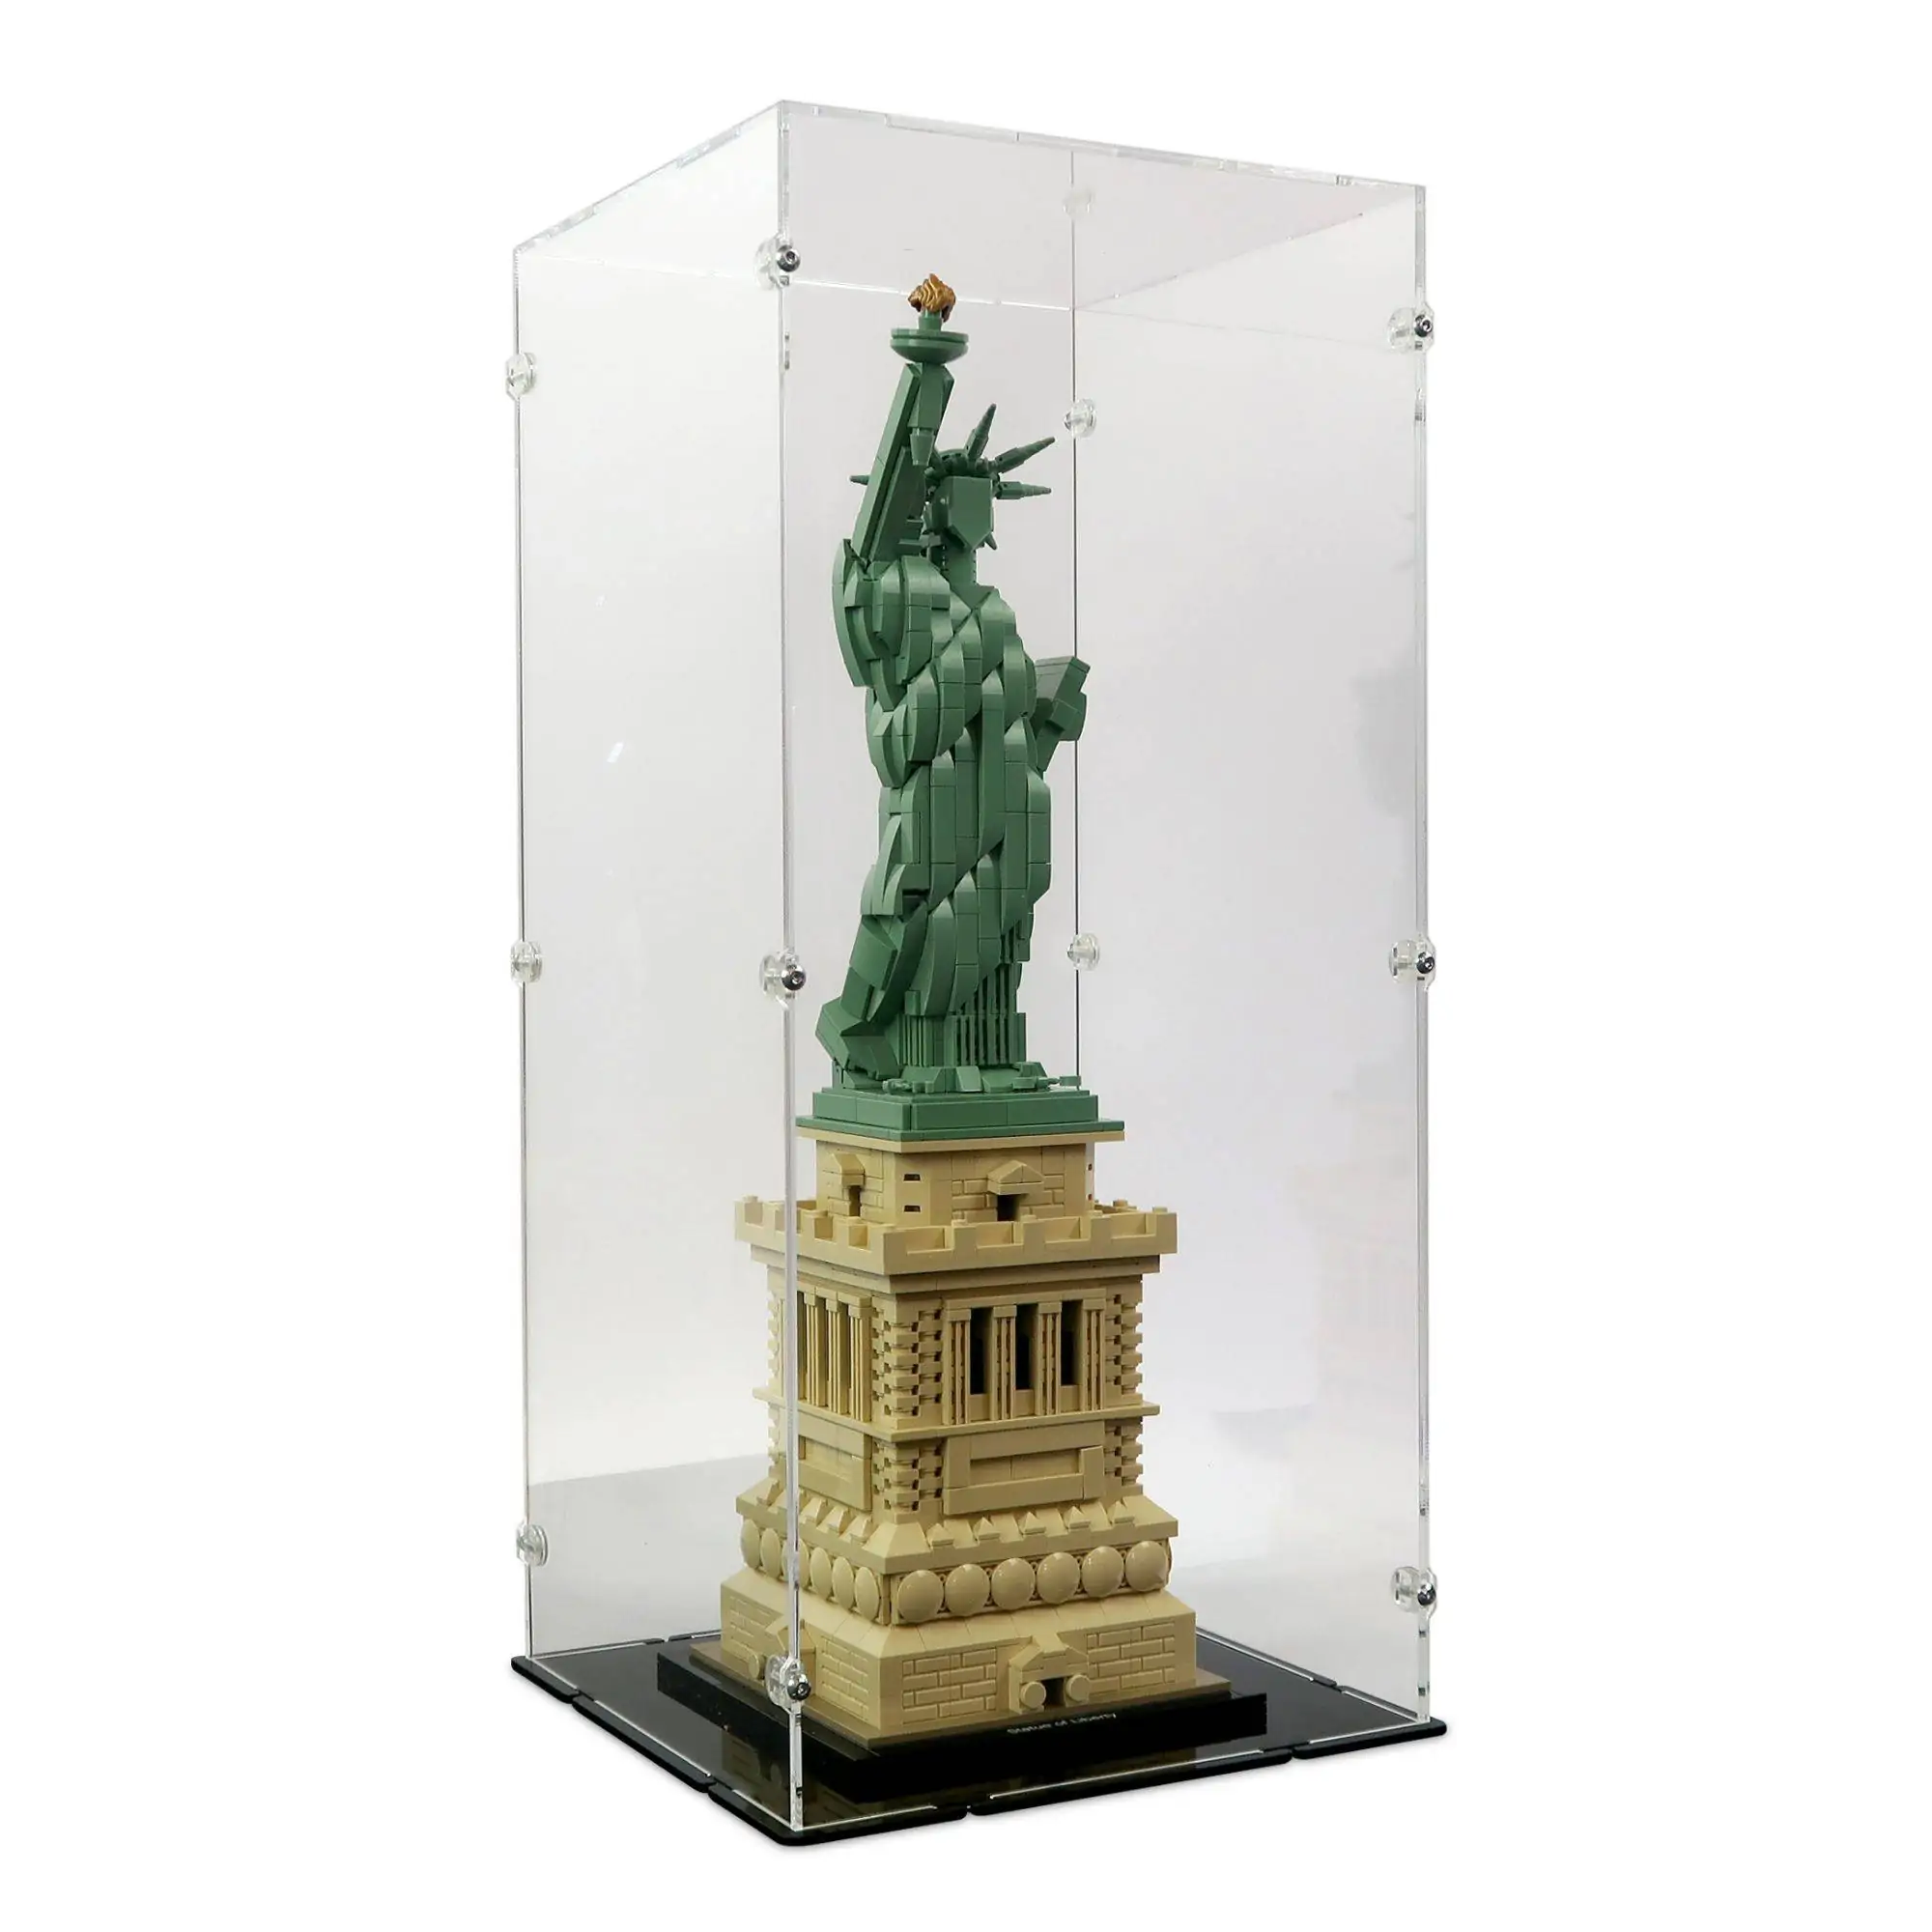 Statue Of Liberty Display Case for LEGO 21042